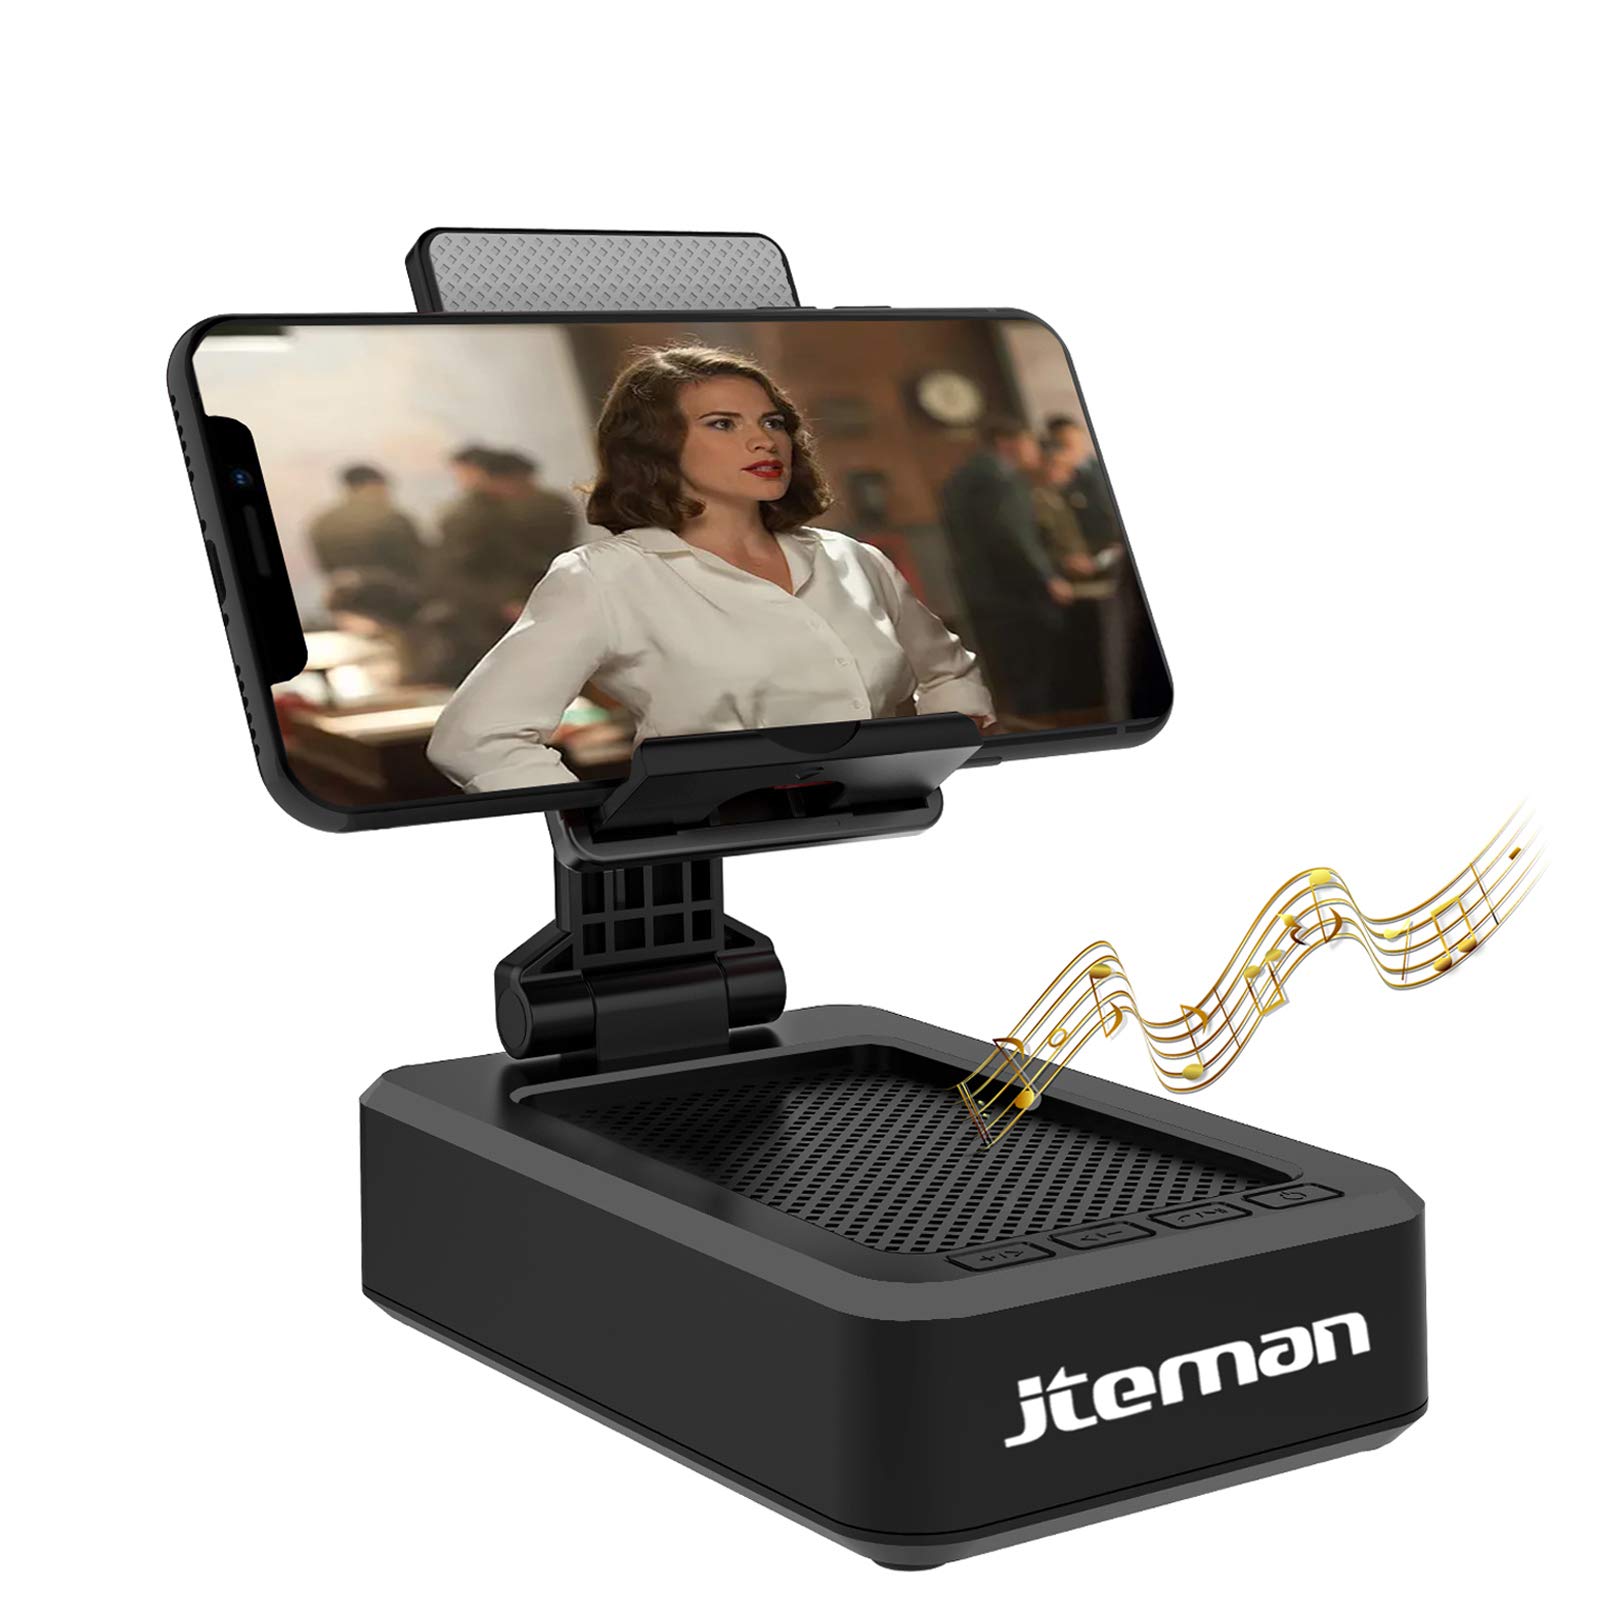 JTEMAN Cell Phone Stand with Wireless Bluetooth Speaker...